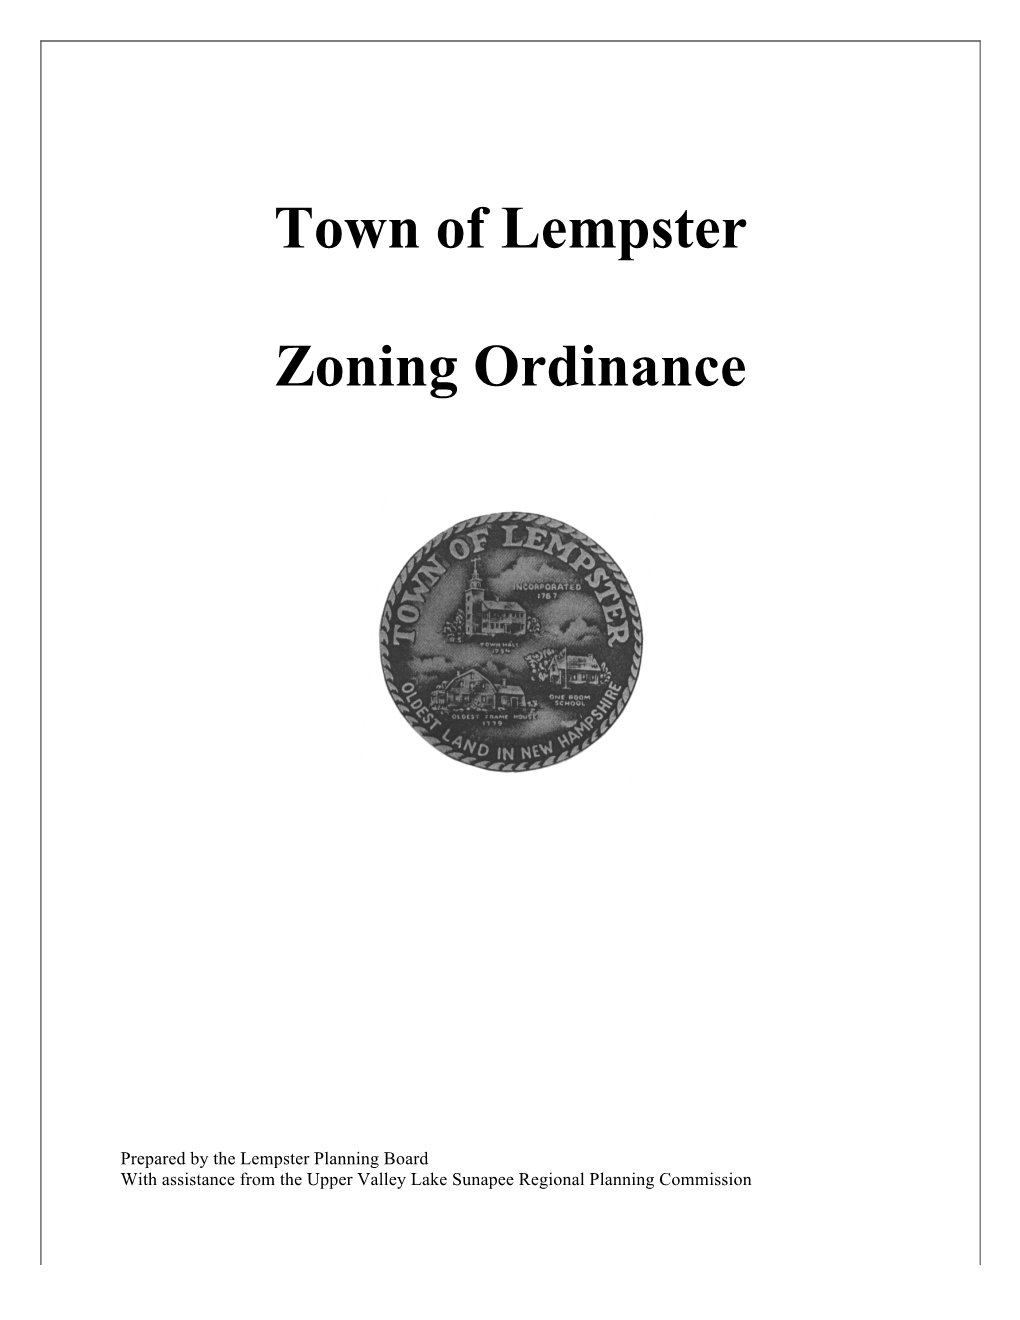 Town of Lempster Zoning Ordinance, and Shall Be Considered Part of the Zoning Ordinance for Purposes of Administration and Appeals Under State Law